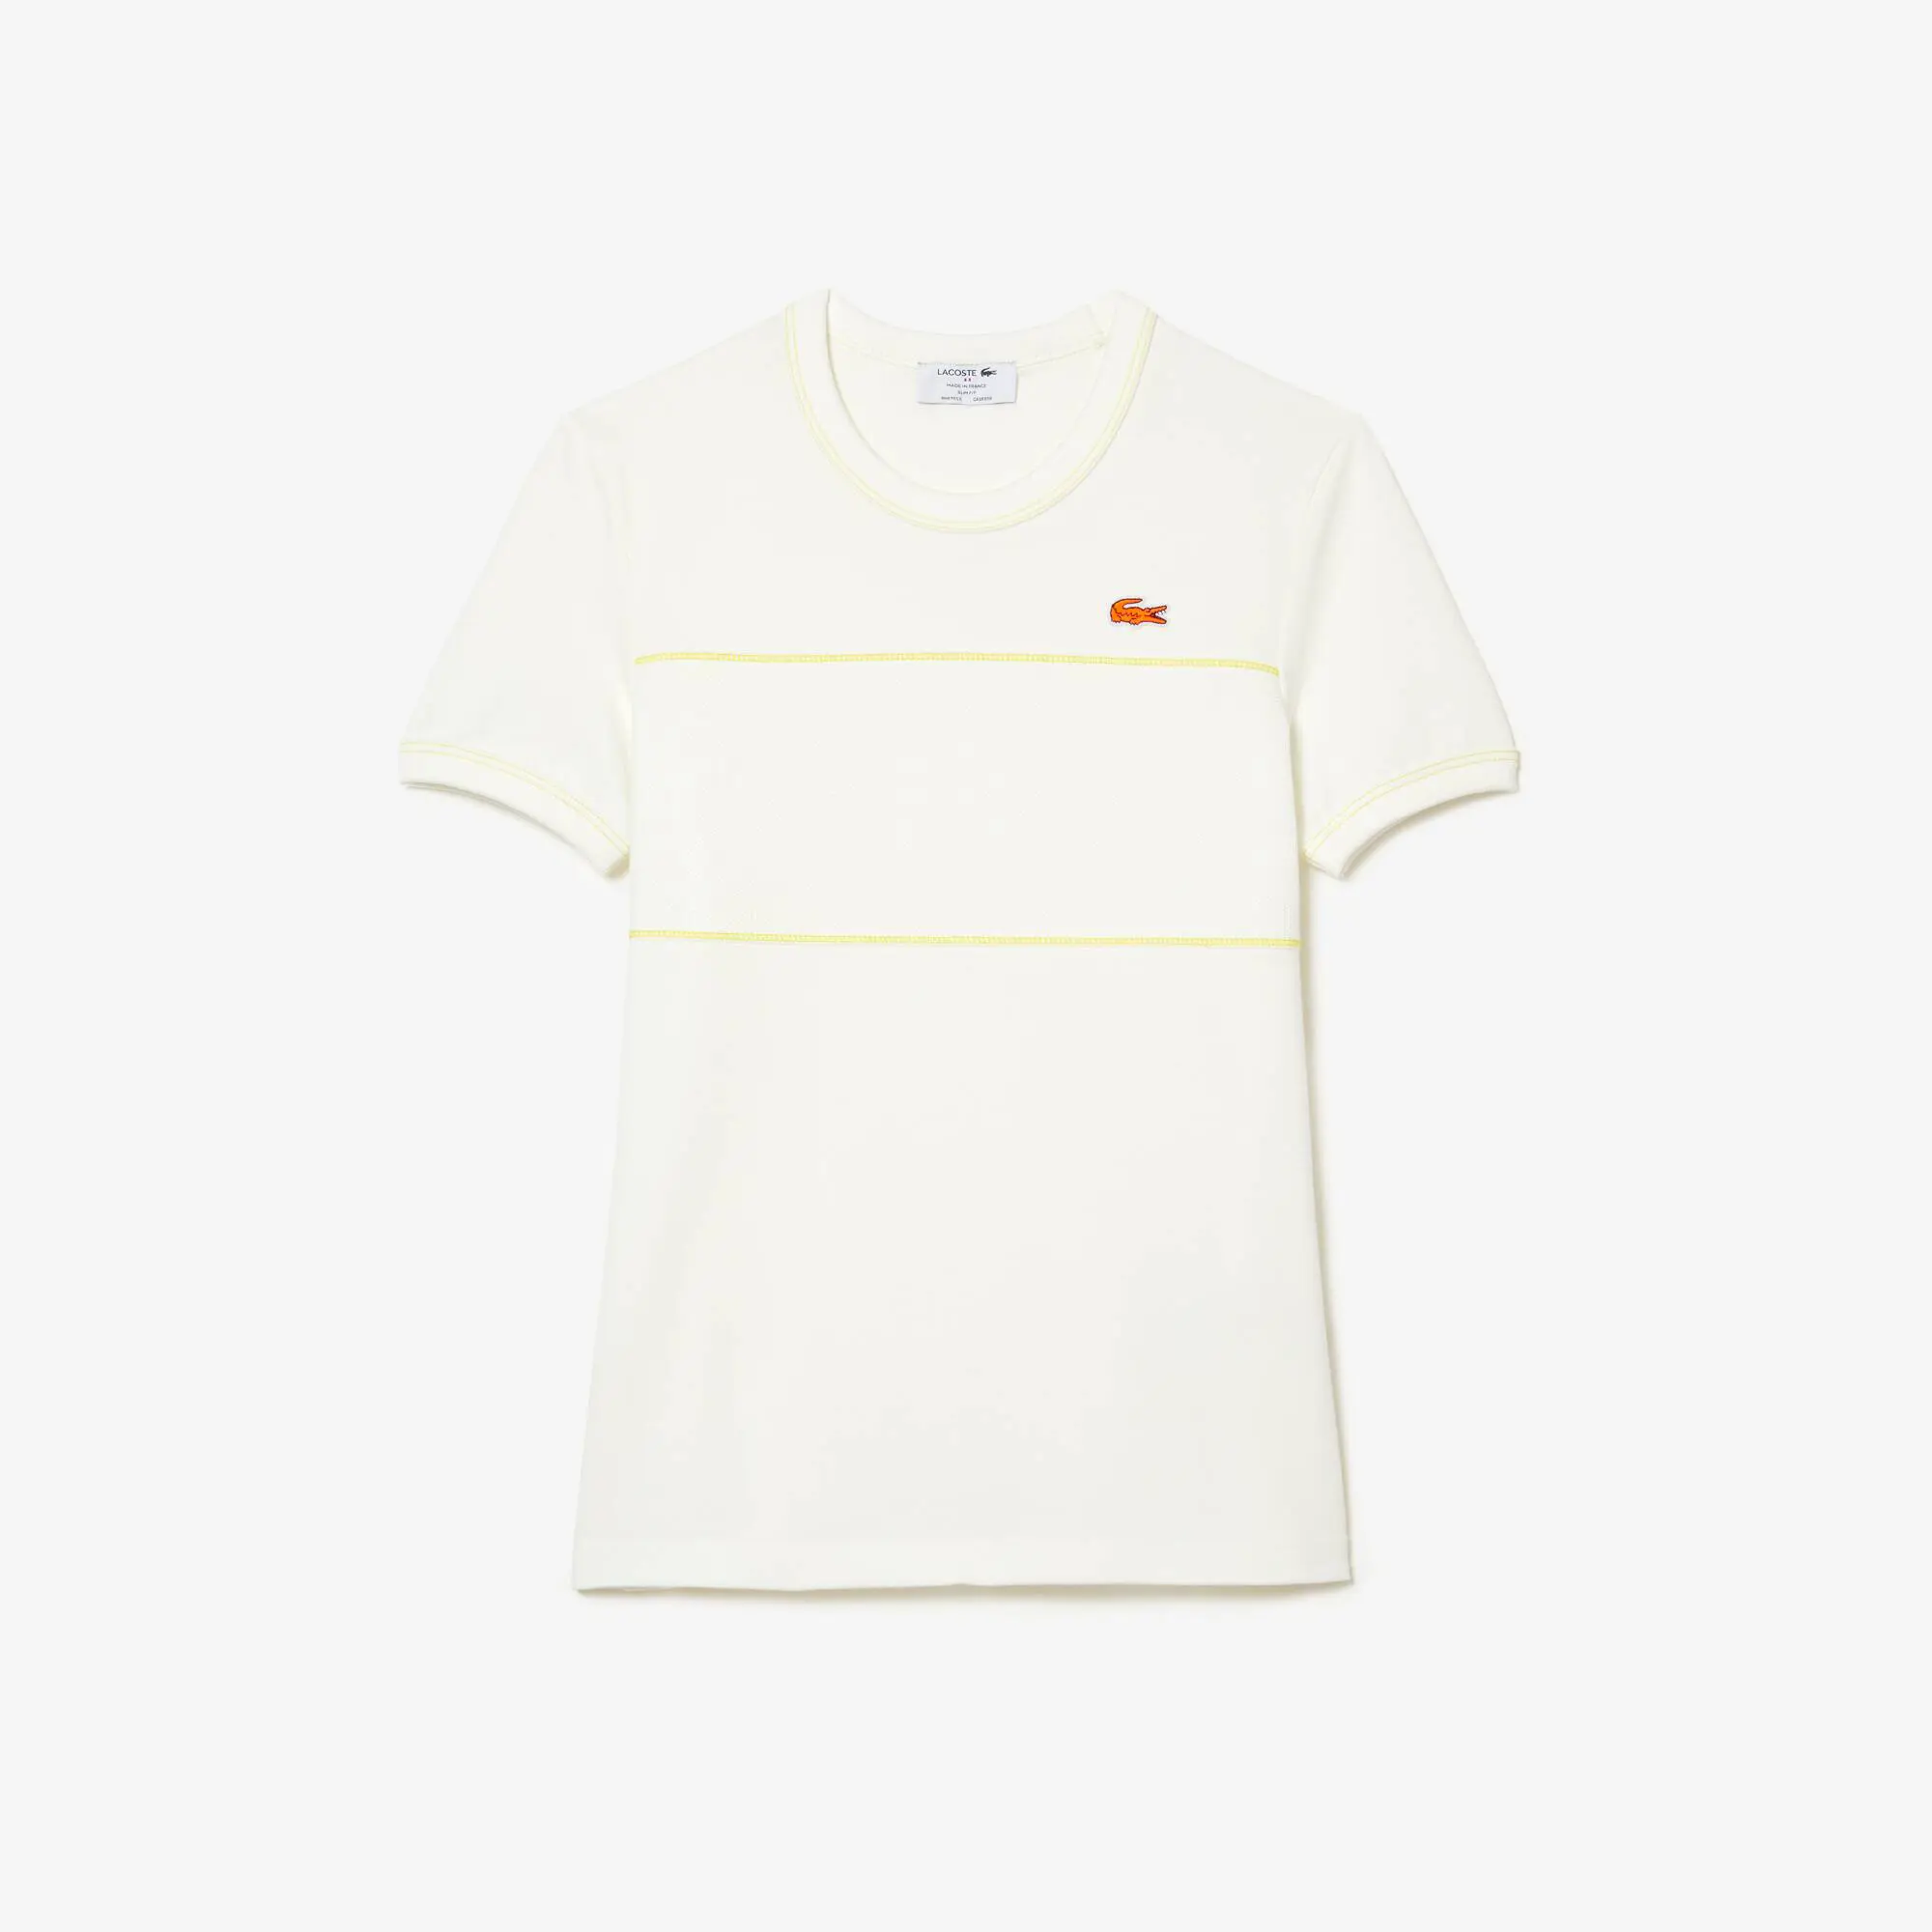 Lacoste Women’s Made In France Organic Cotton Piqué T-Shirt. 2